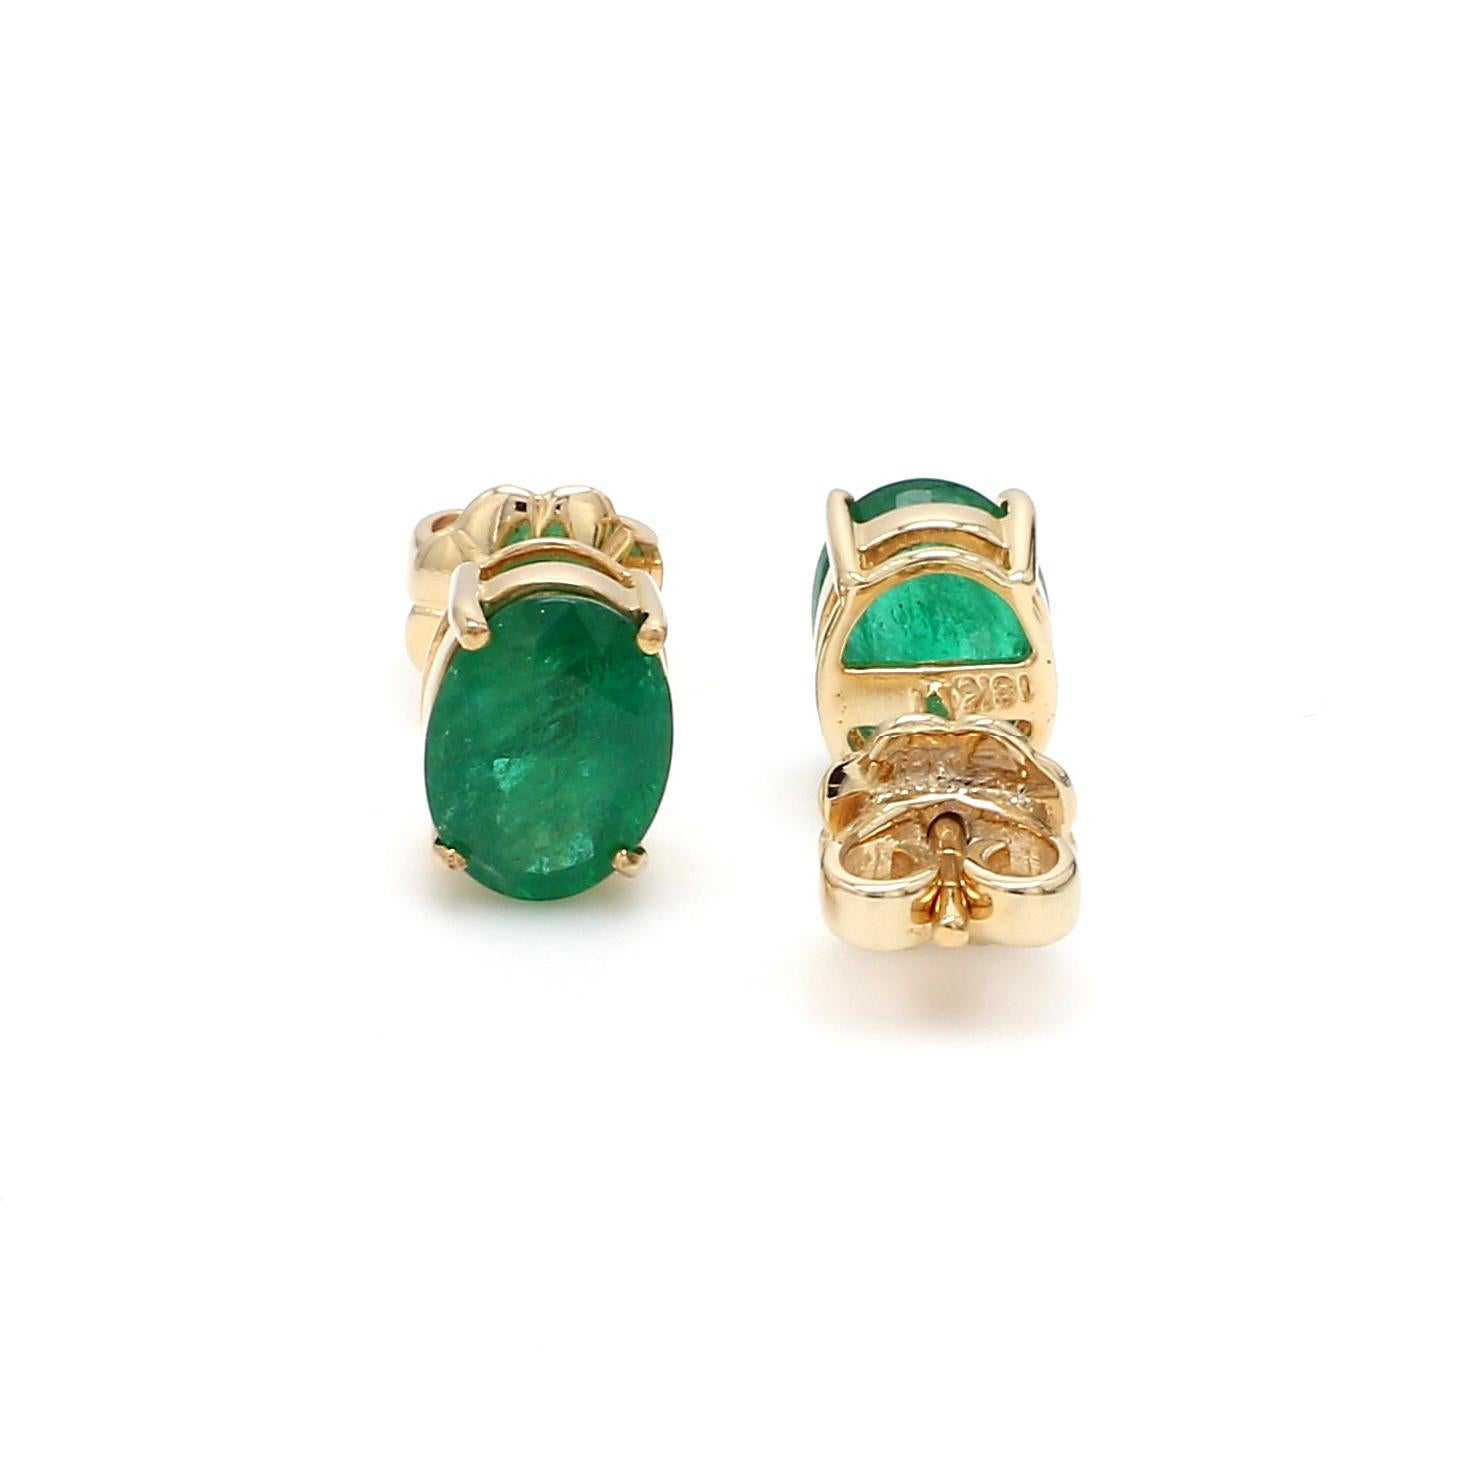 Women's 2.05 Carat Oval Natural Emerald Gemstone Stud Earrings 18k Yellow Gold Jewelry For Sale